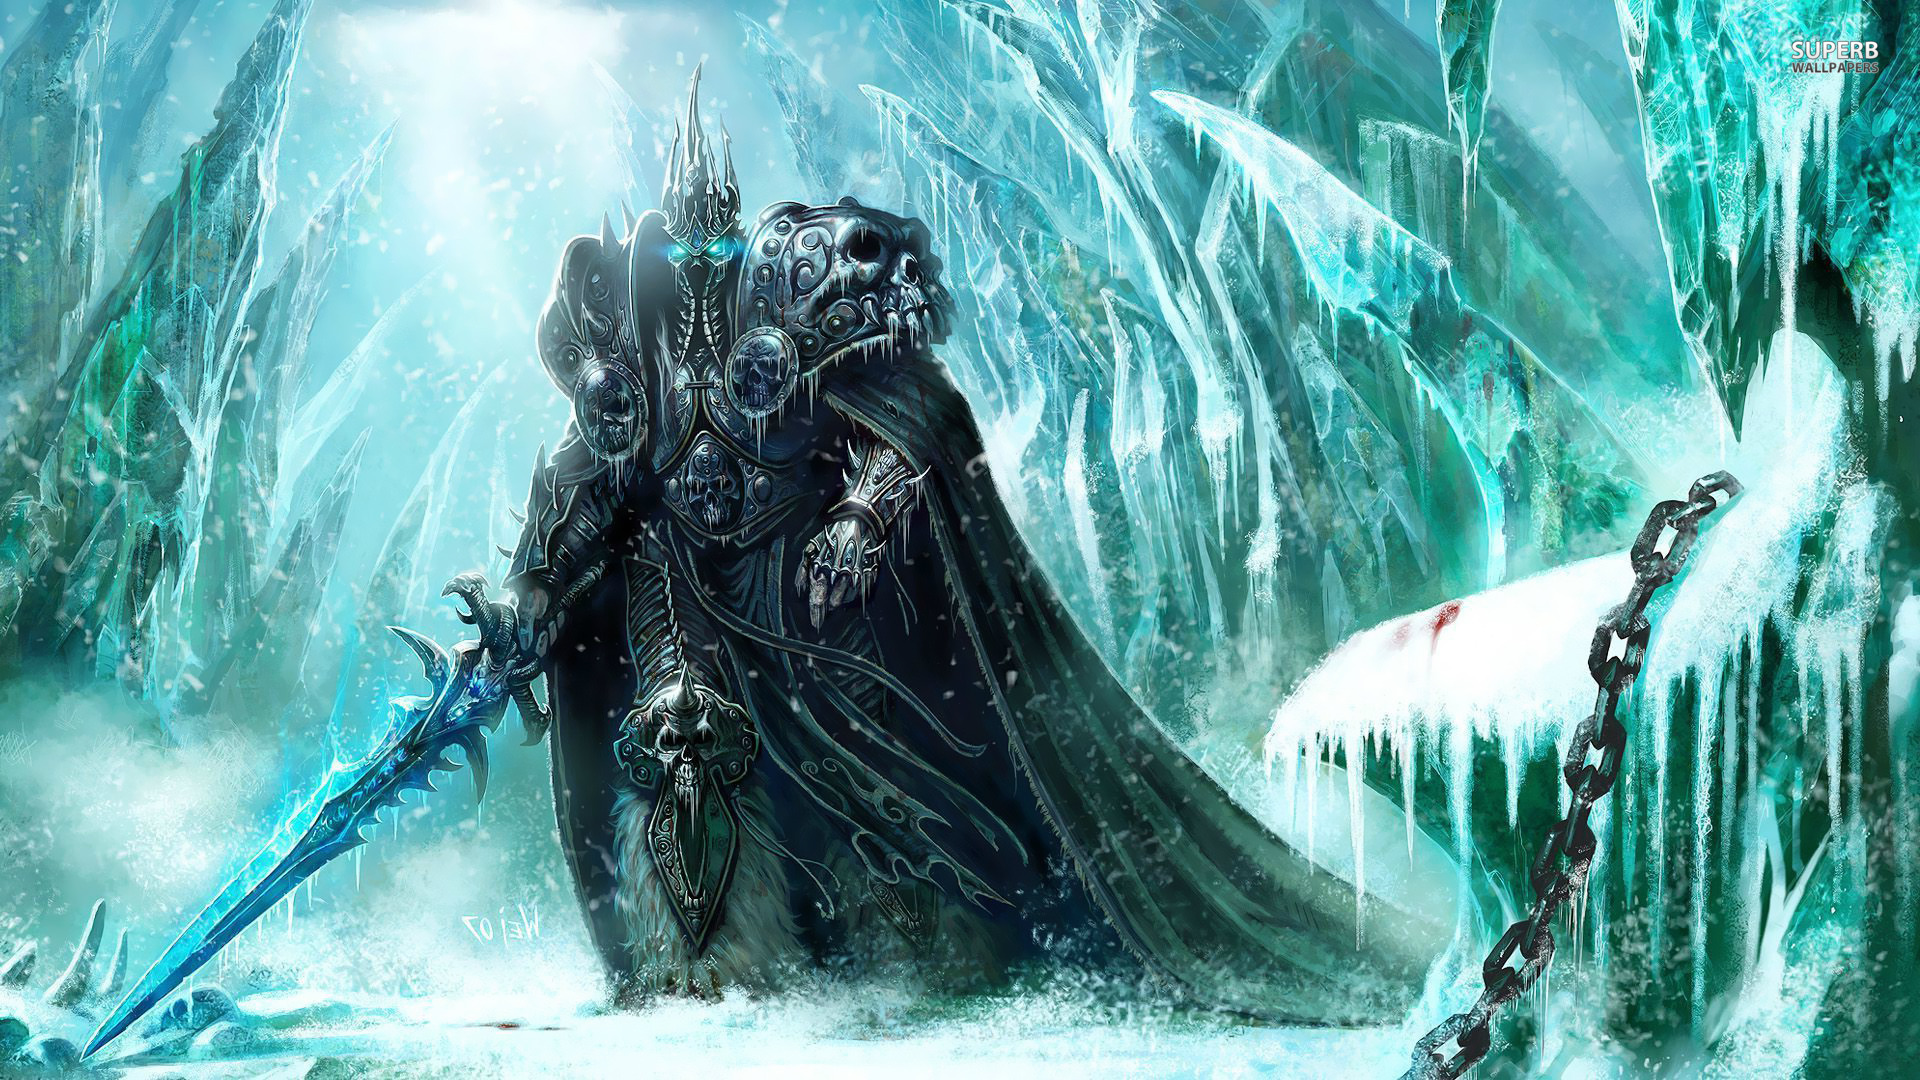 World of Warcraft Wrath of the Lich king - Wallpaper 2